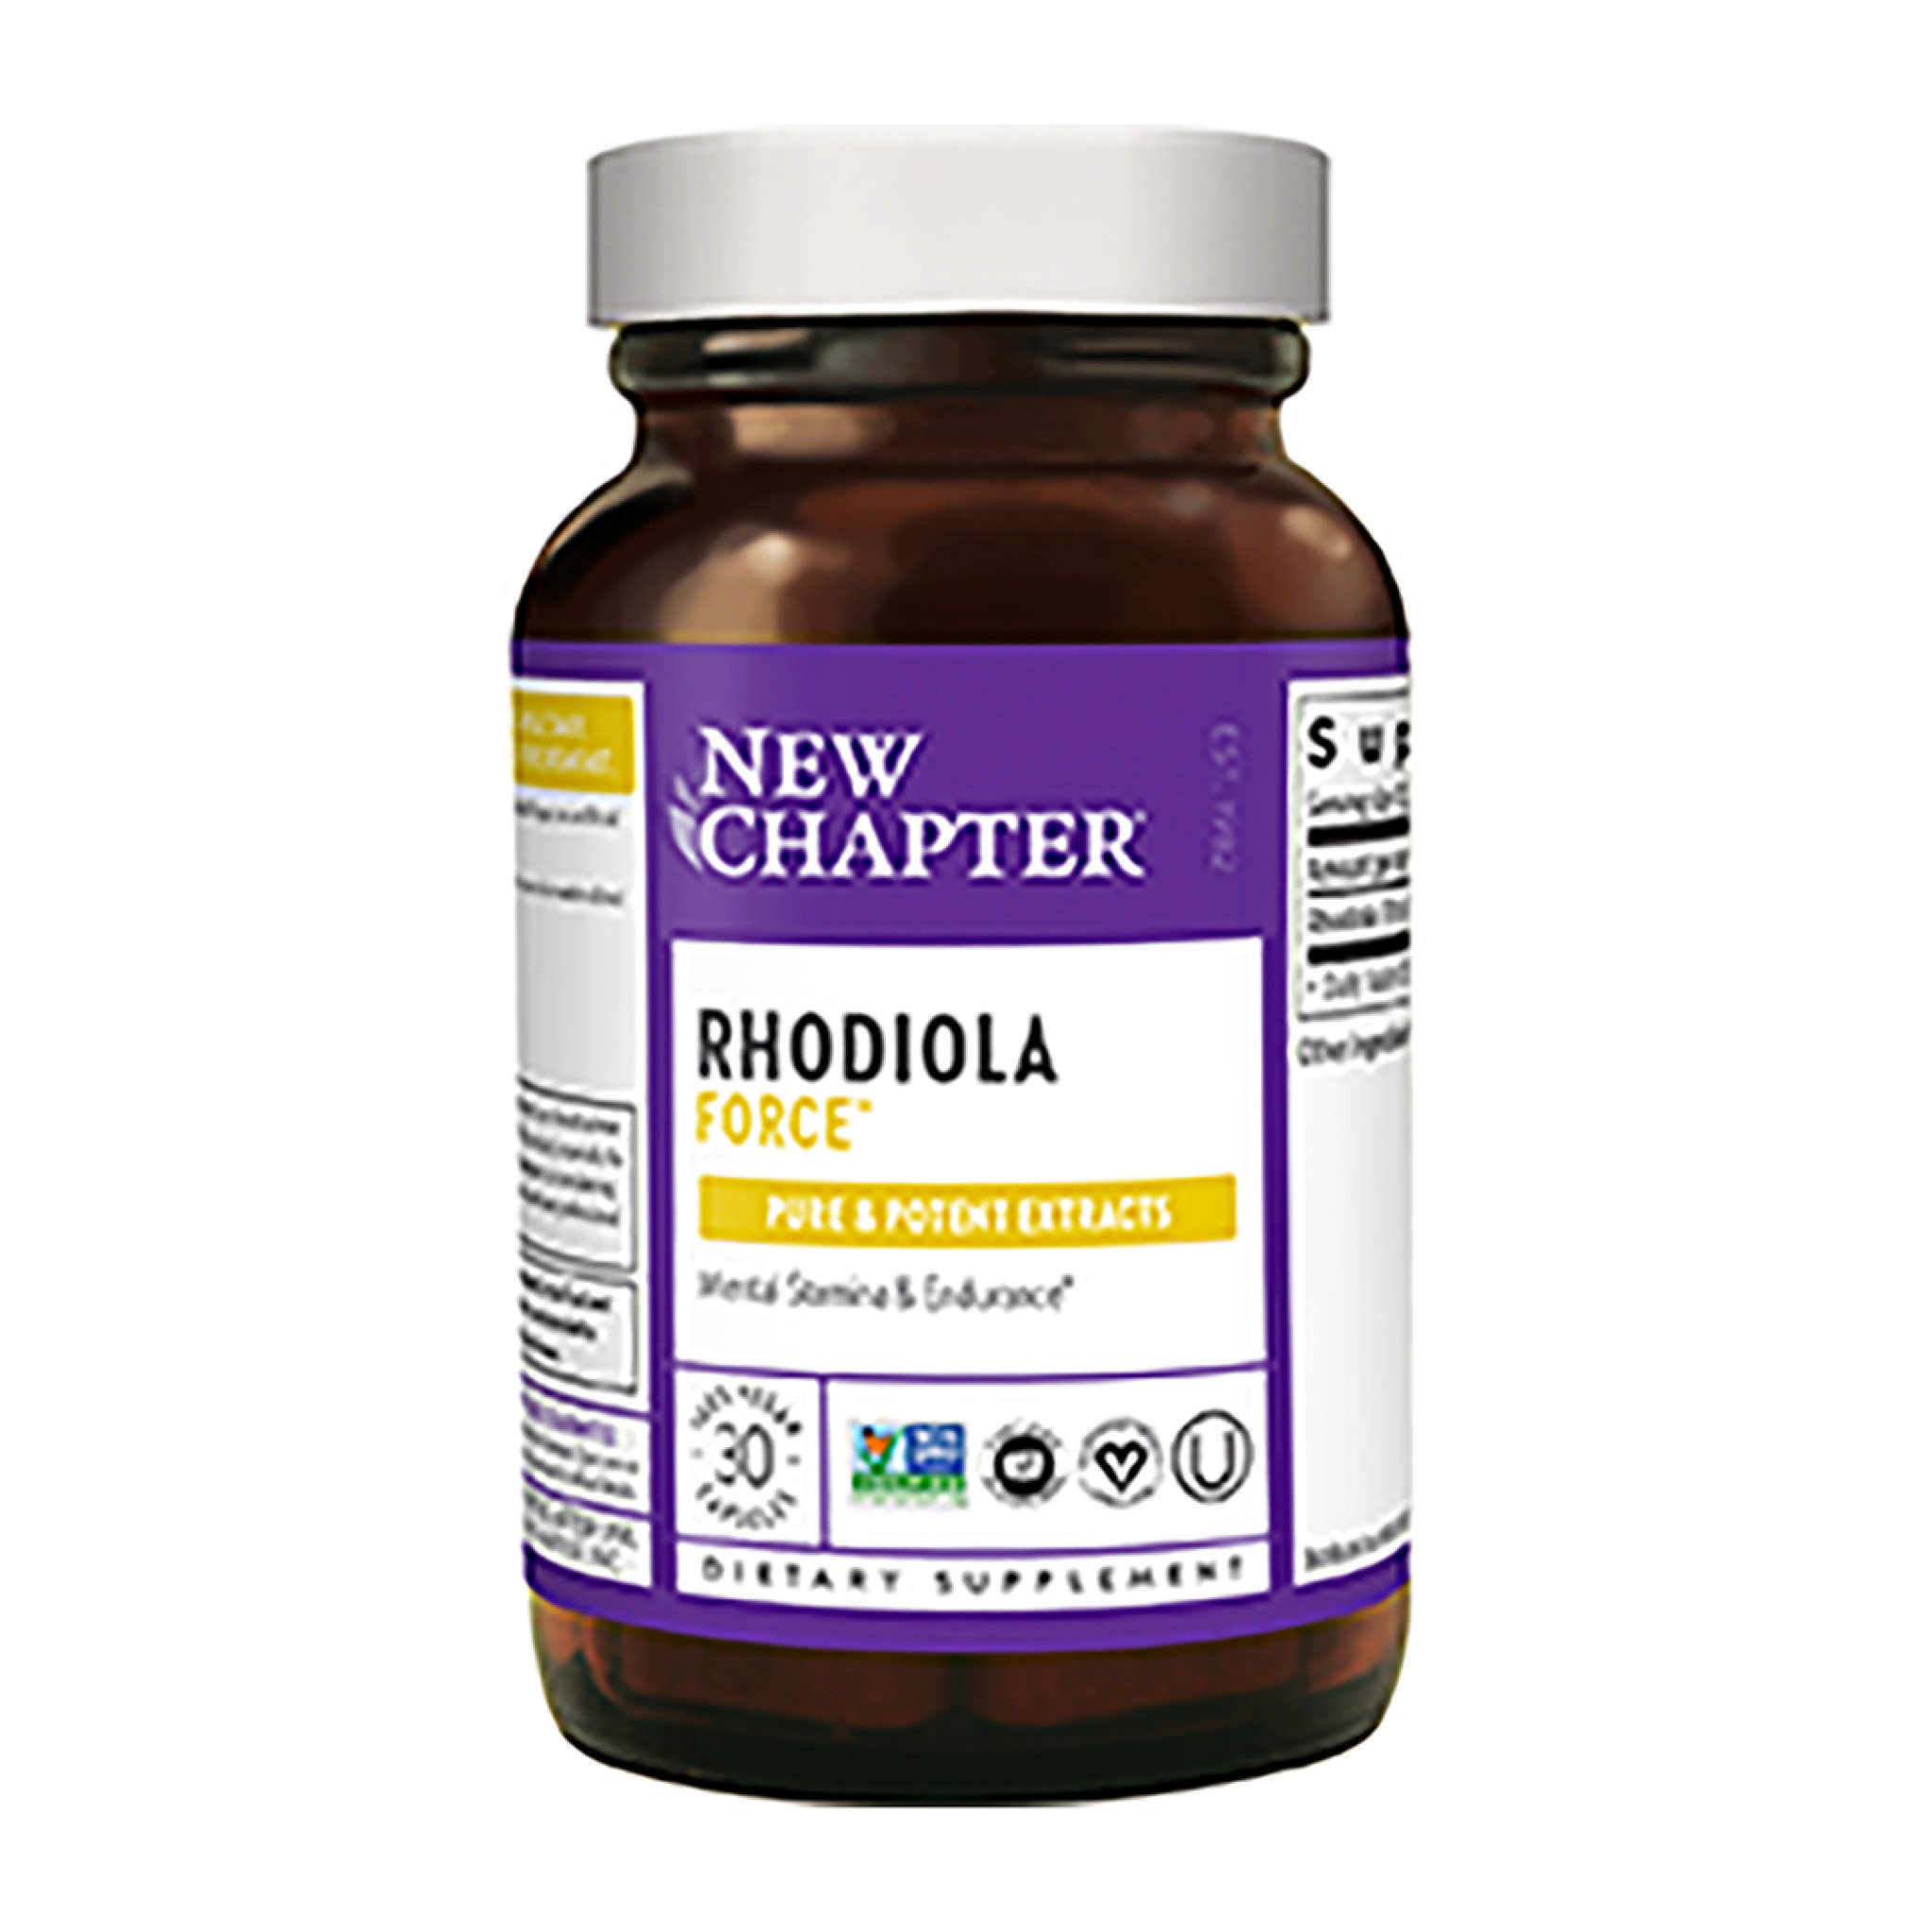 New Chapter - Rhodiola Force 300 mg